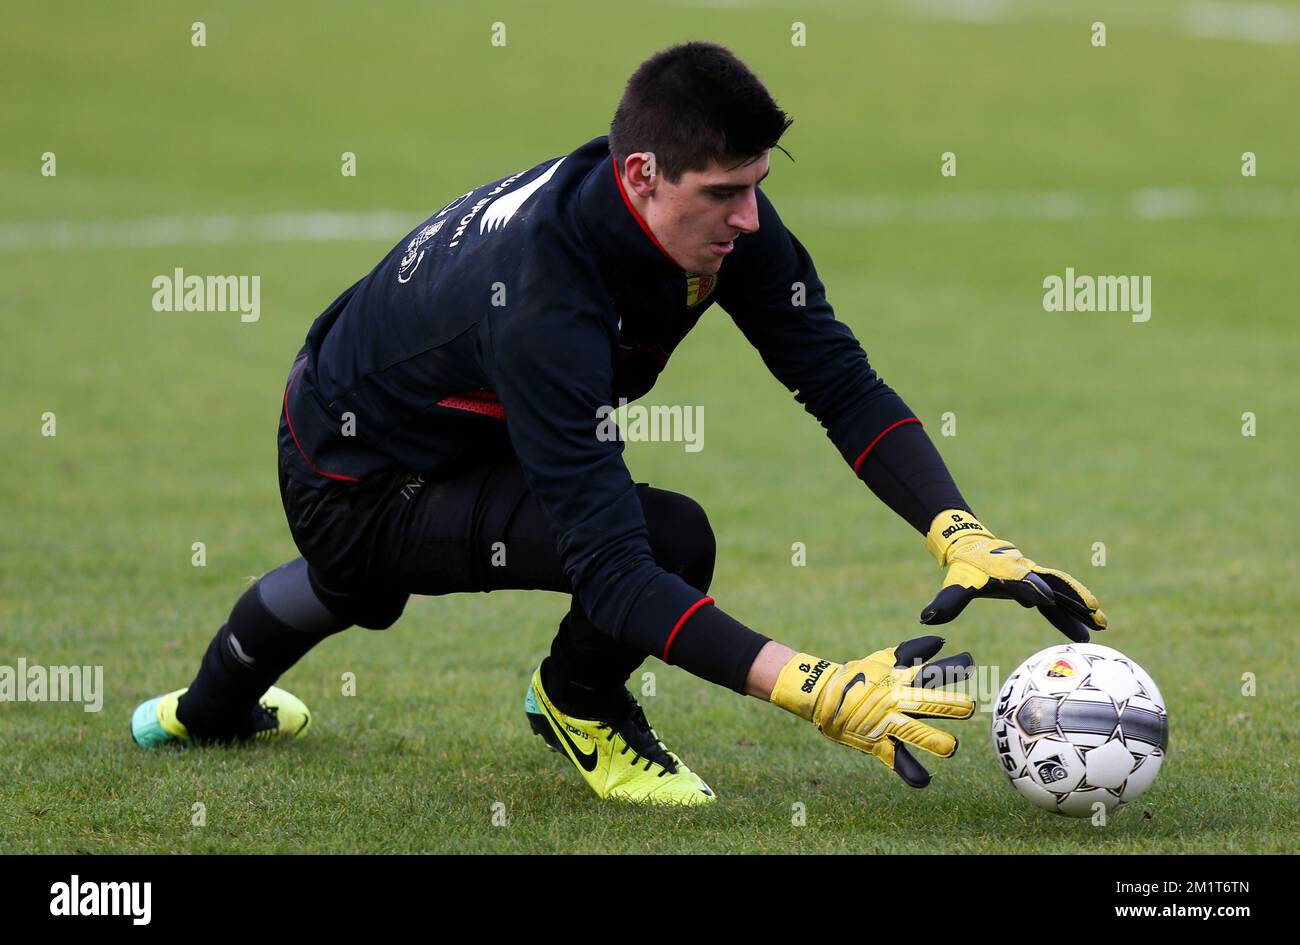 20131115 - BRUSSELS, BELGIUM: Belgium's goalkeeper Thibaut Courtois pictured during a training session of Belgian national soccer team Red Devils in Brussels, on Friday 15 November 2013. Yesterday they played Colombia and they will play Japan on November 19th in friendly games. BELGA PHOTO VIRGINIE LEFOUR Stock Photo